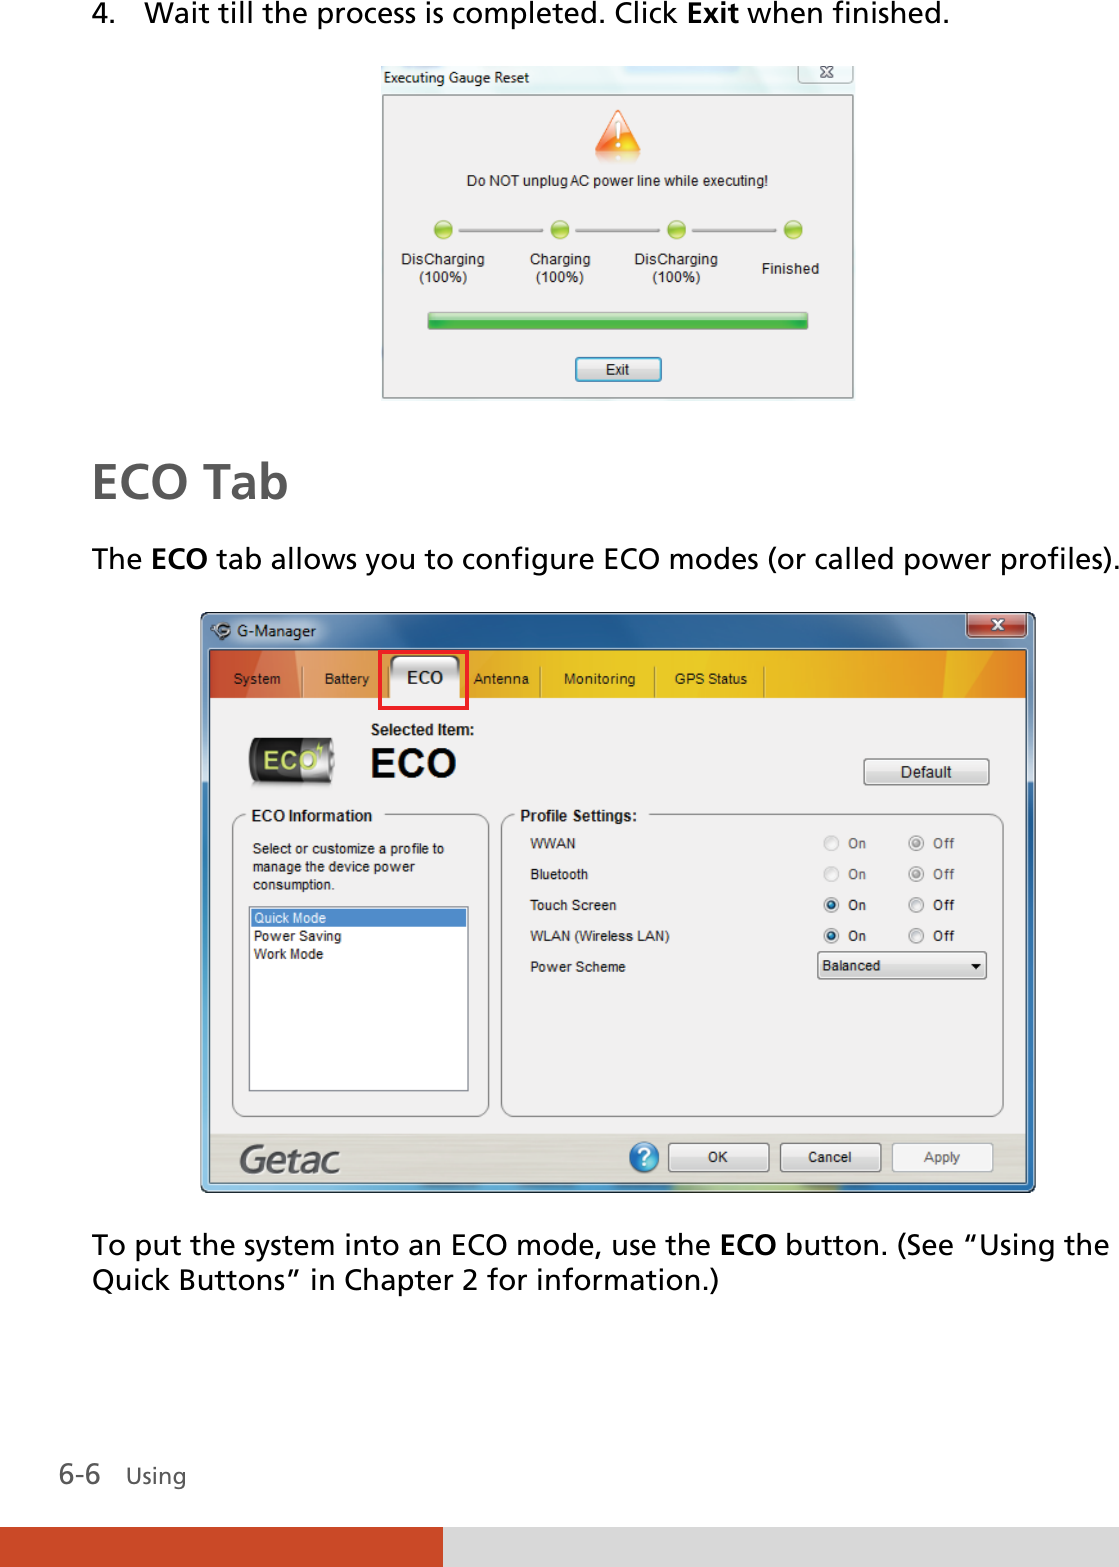  6-6   Using  4. Wait till the process is completed. Click Exit when finished.  ECO Tab The ECO tab allows you to configure ECO modes (or called power profiles).  To put the system into an ECO mode, use the ECO button. (See “Using the Quick Buttons” in Chapter 2 for information.) 